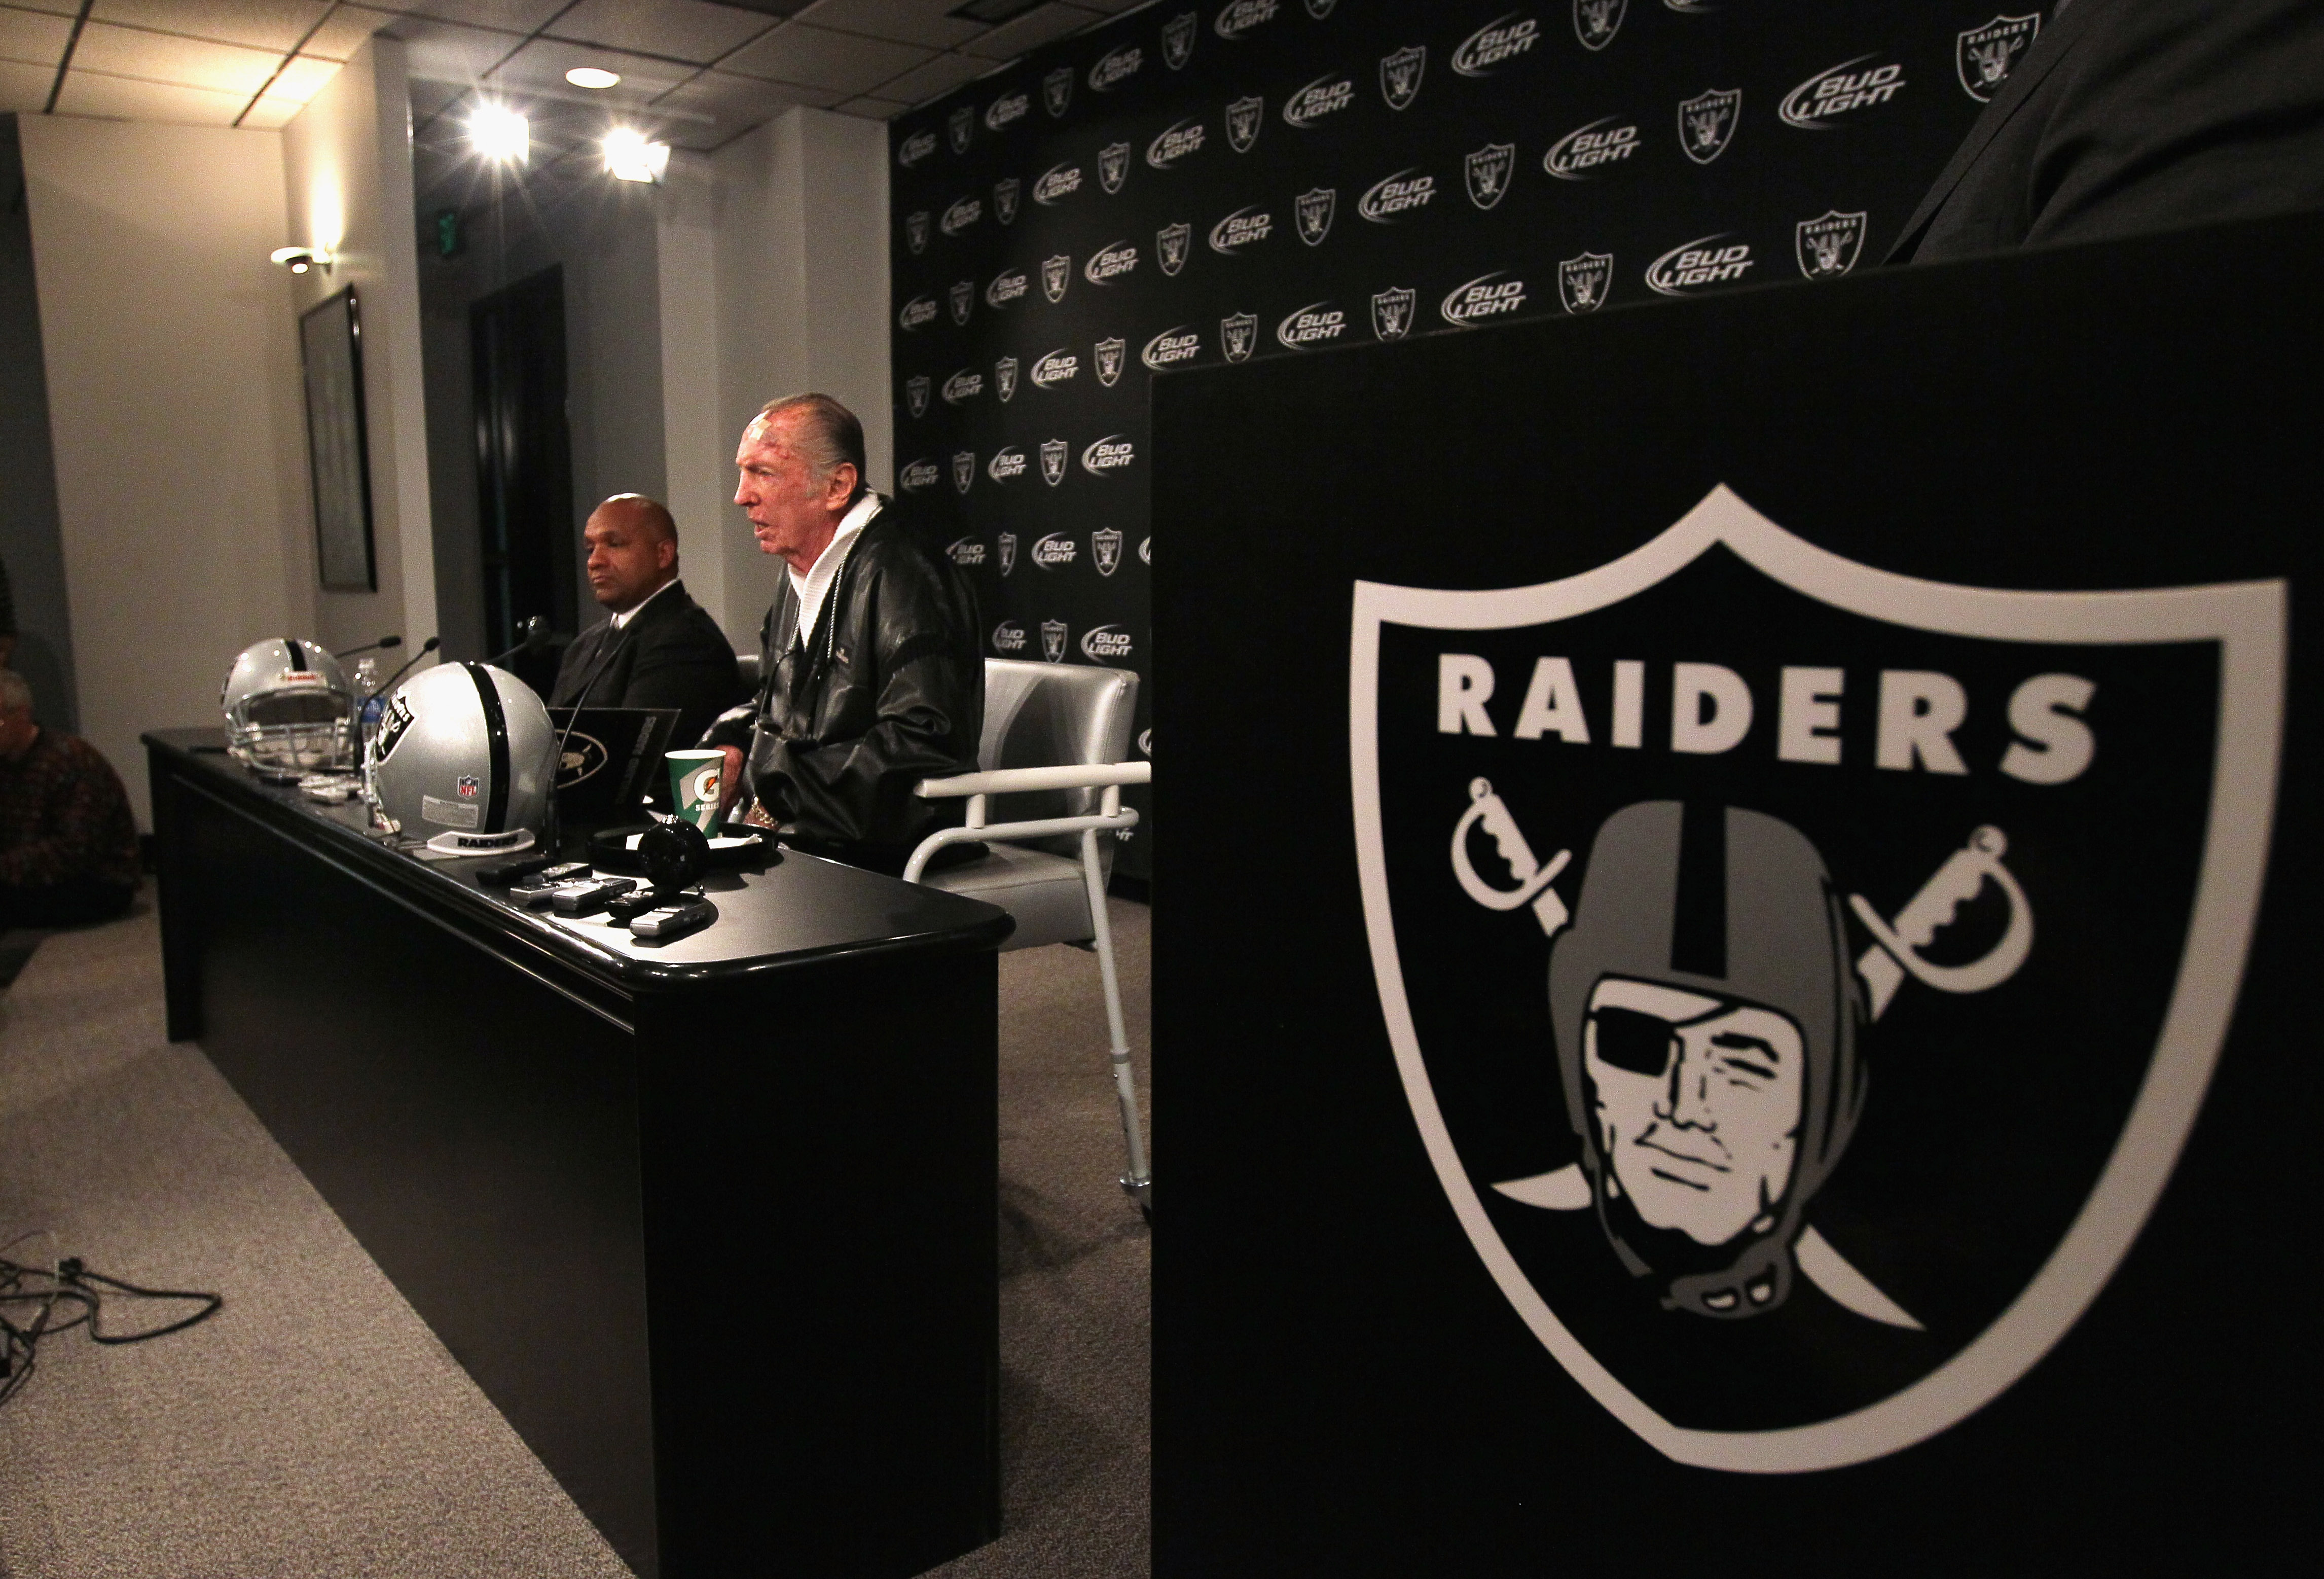 ALAMEDA, CA - JANUARY 18:  New Oakland Raiders coach Hue Jackson (L) looks on as Raiders owner Al Davis speaks during a press conference on January 18, 2011 in Alameda, California. Hue Jackson was introduced as the new coach of the Oakland Raiders, replac